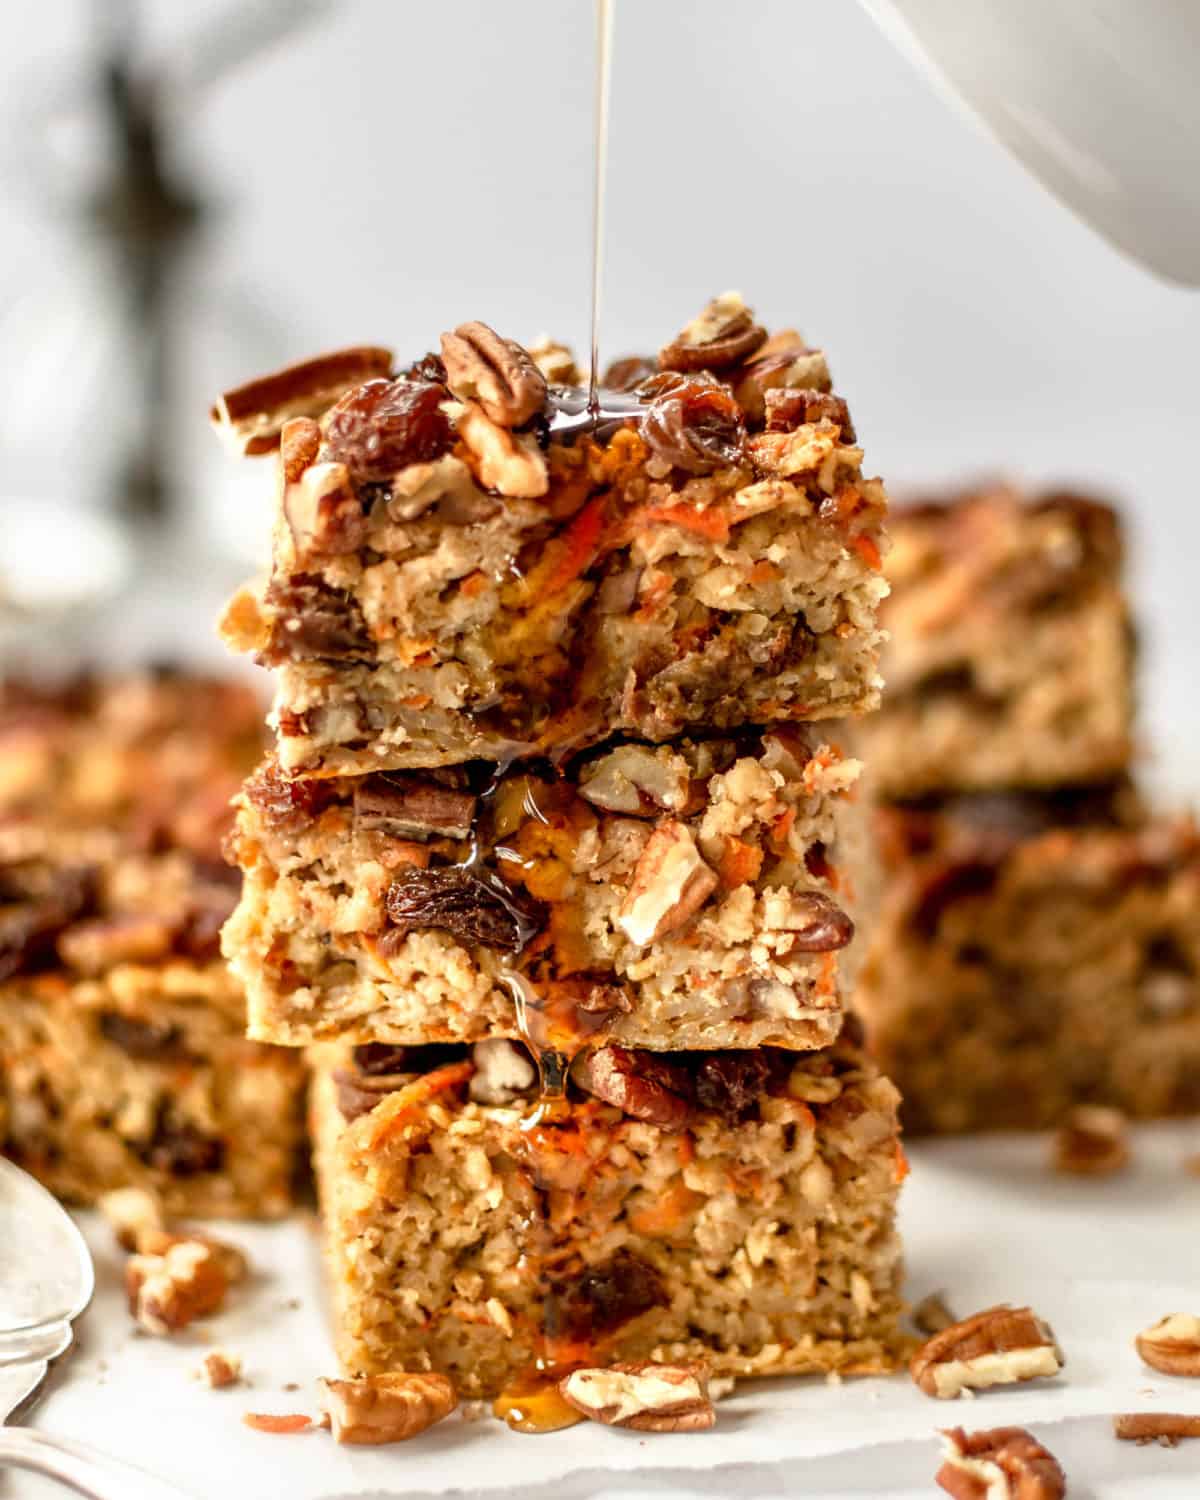 Three slices of carrot cake oatmeal stacked on top of each other.